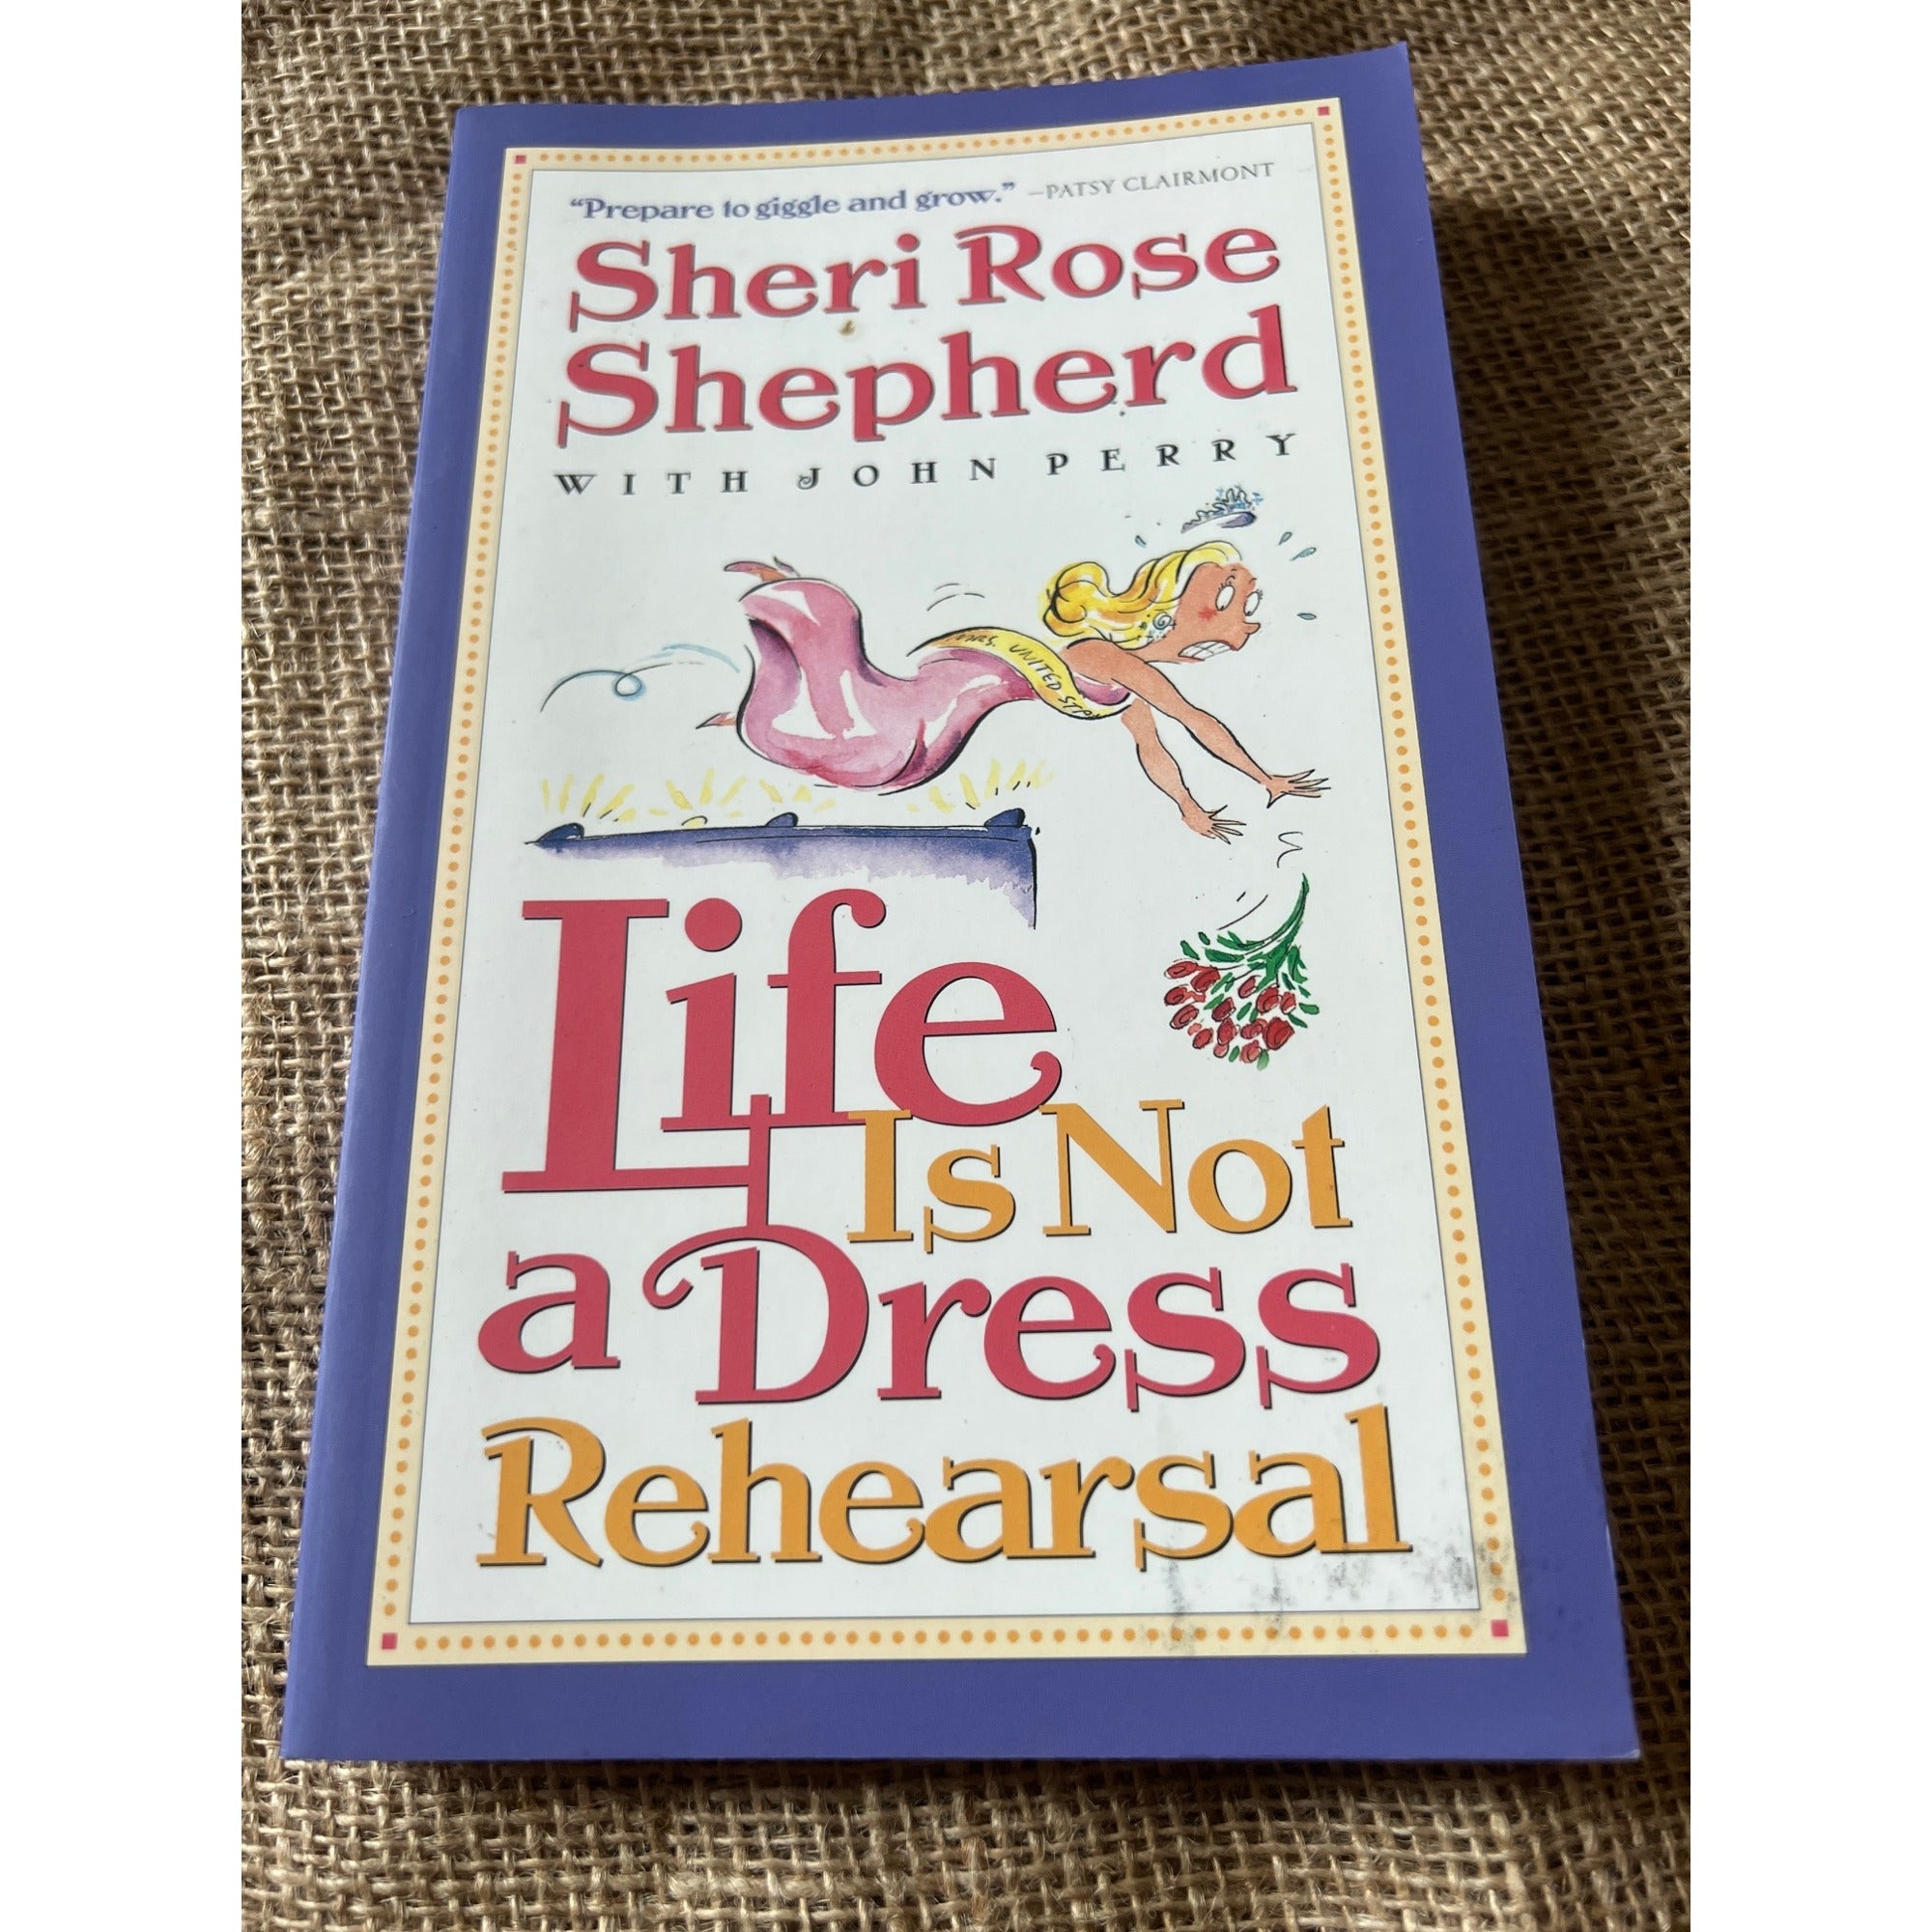 Life Is Not a Dress Rehearsal by Sheri Rose Shepherd Paperback Like New Christian Literature